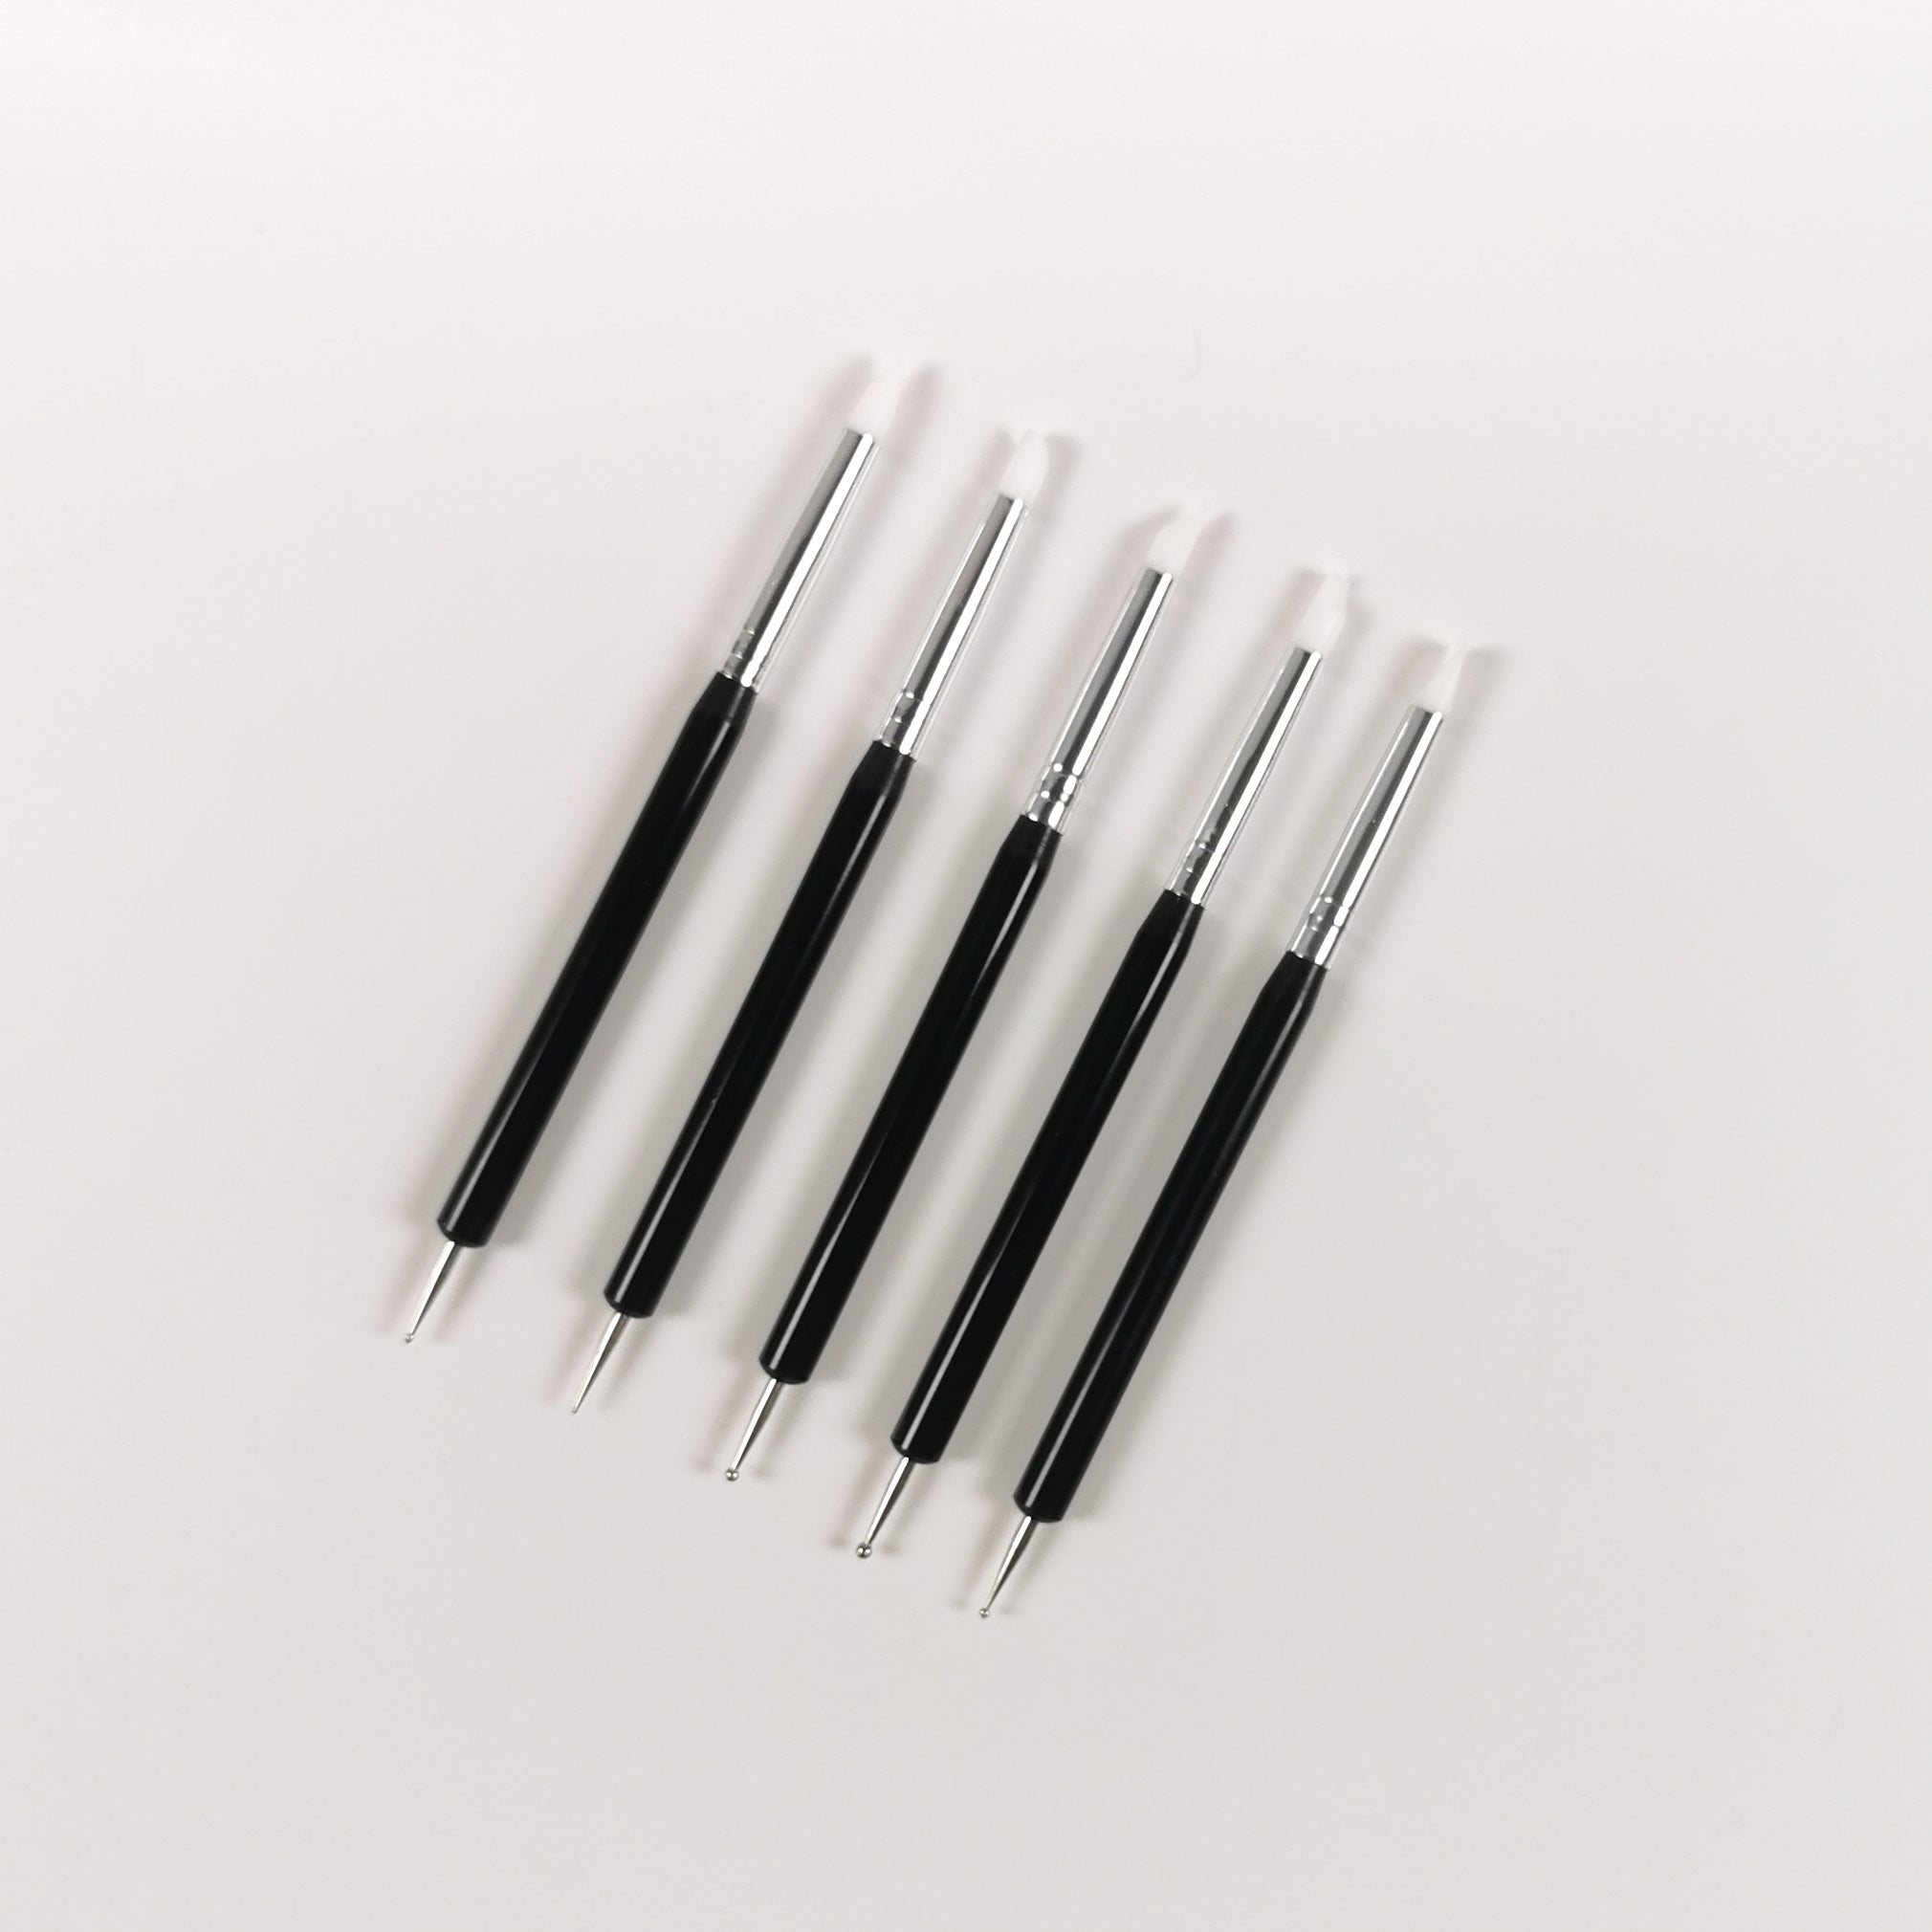 Silicon Tip Shaping and Ball Stylus Dotting Tool